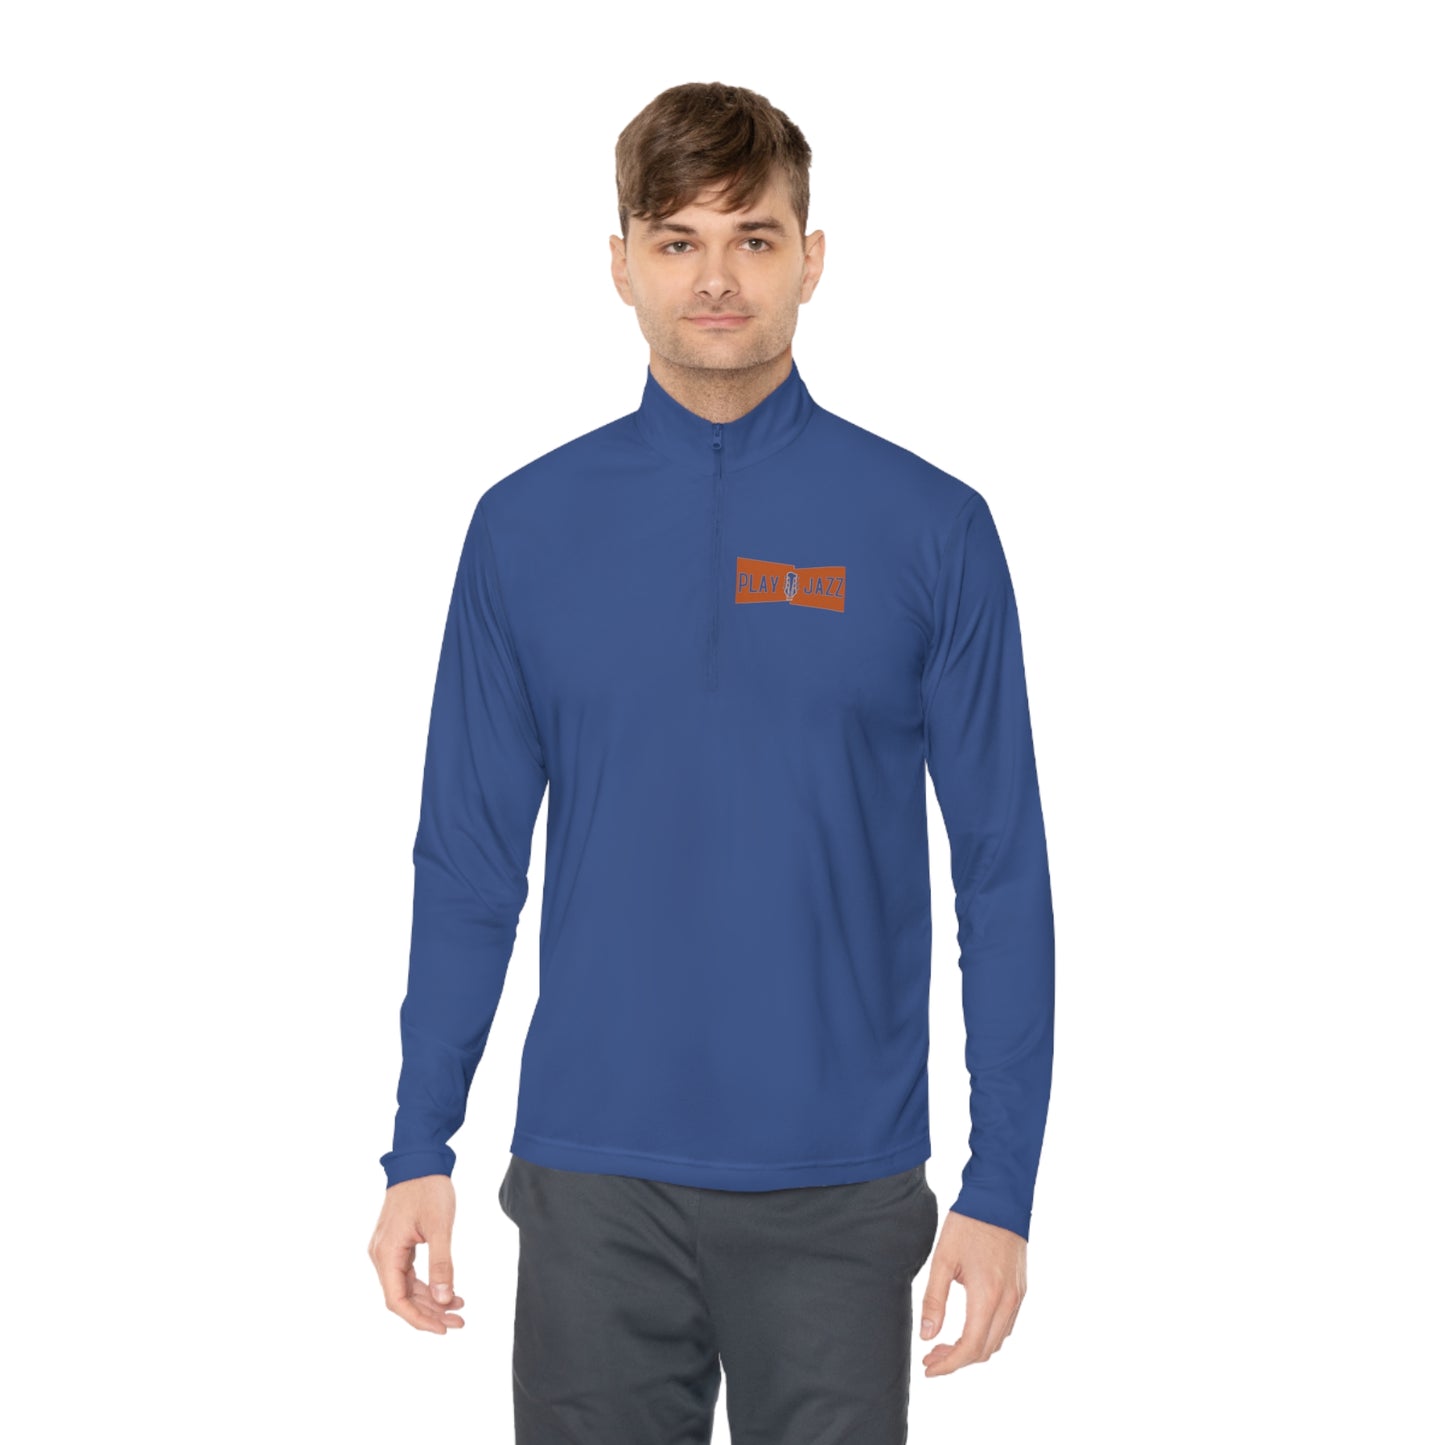 Play Jazz Unisex Zip Pullover (Relaxed Fit)